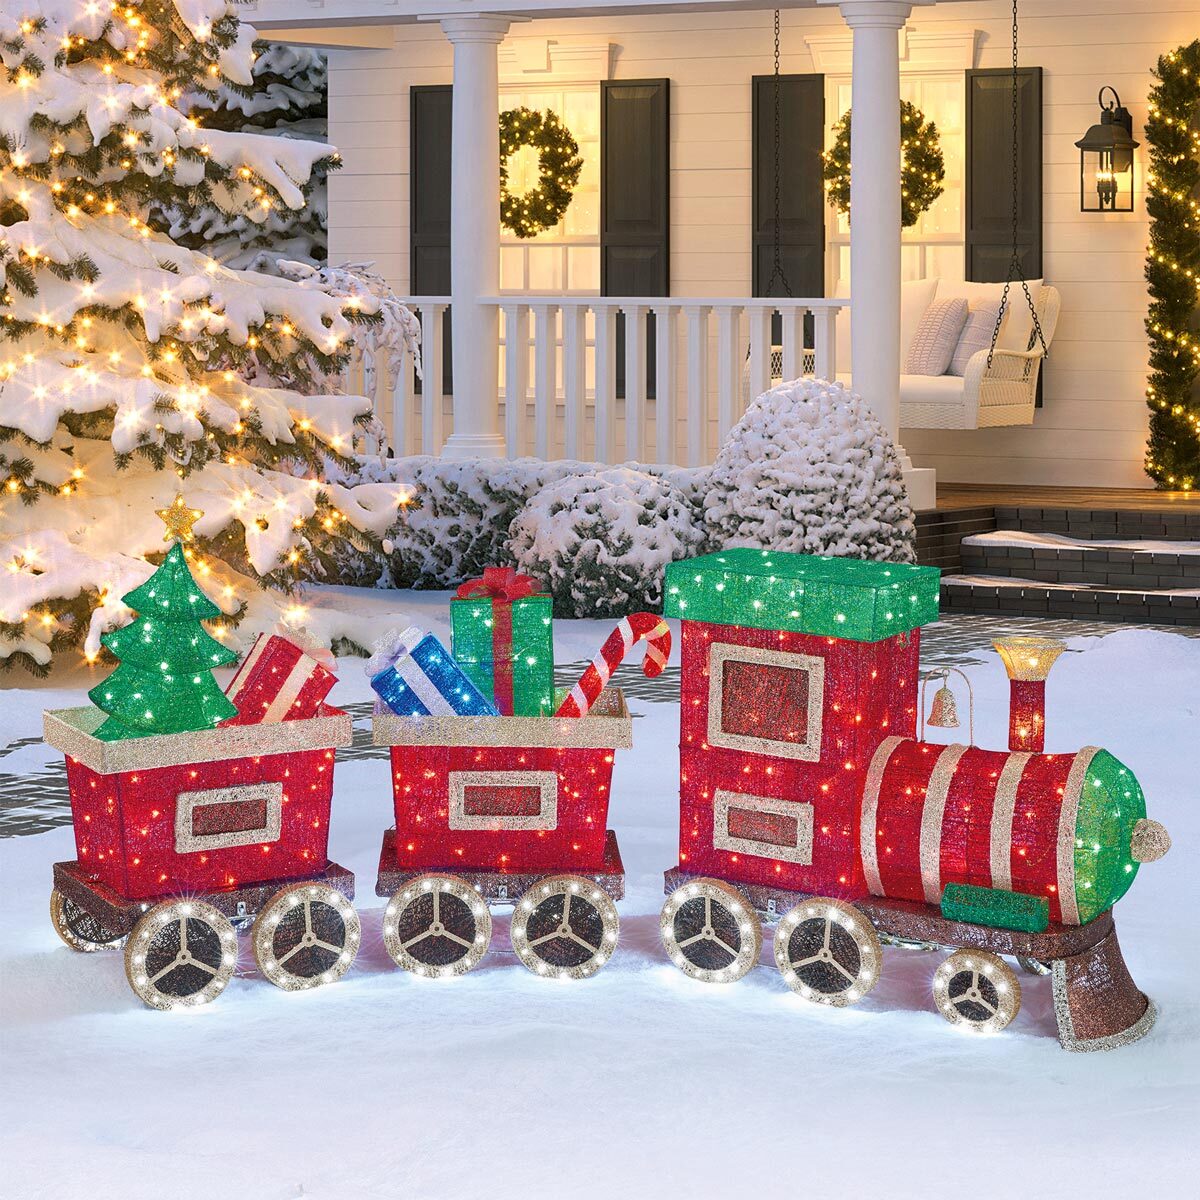 3 Piece Indoor / Outdoor Christmas Train Set with LED Lights